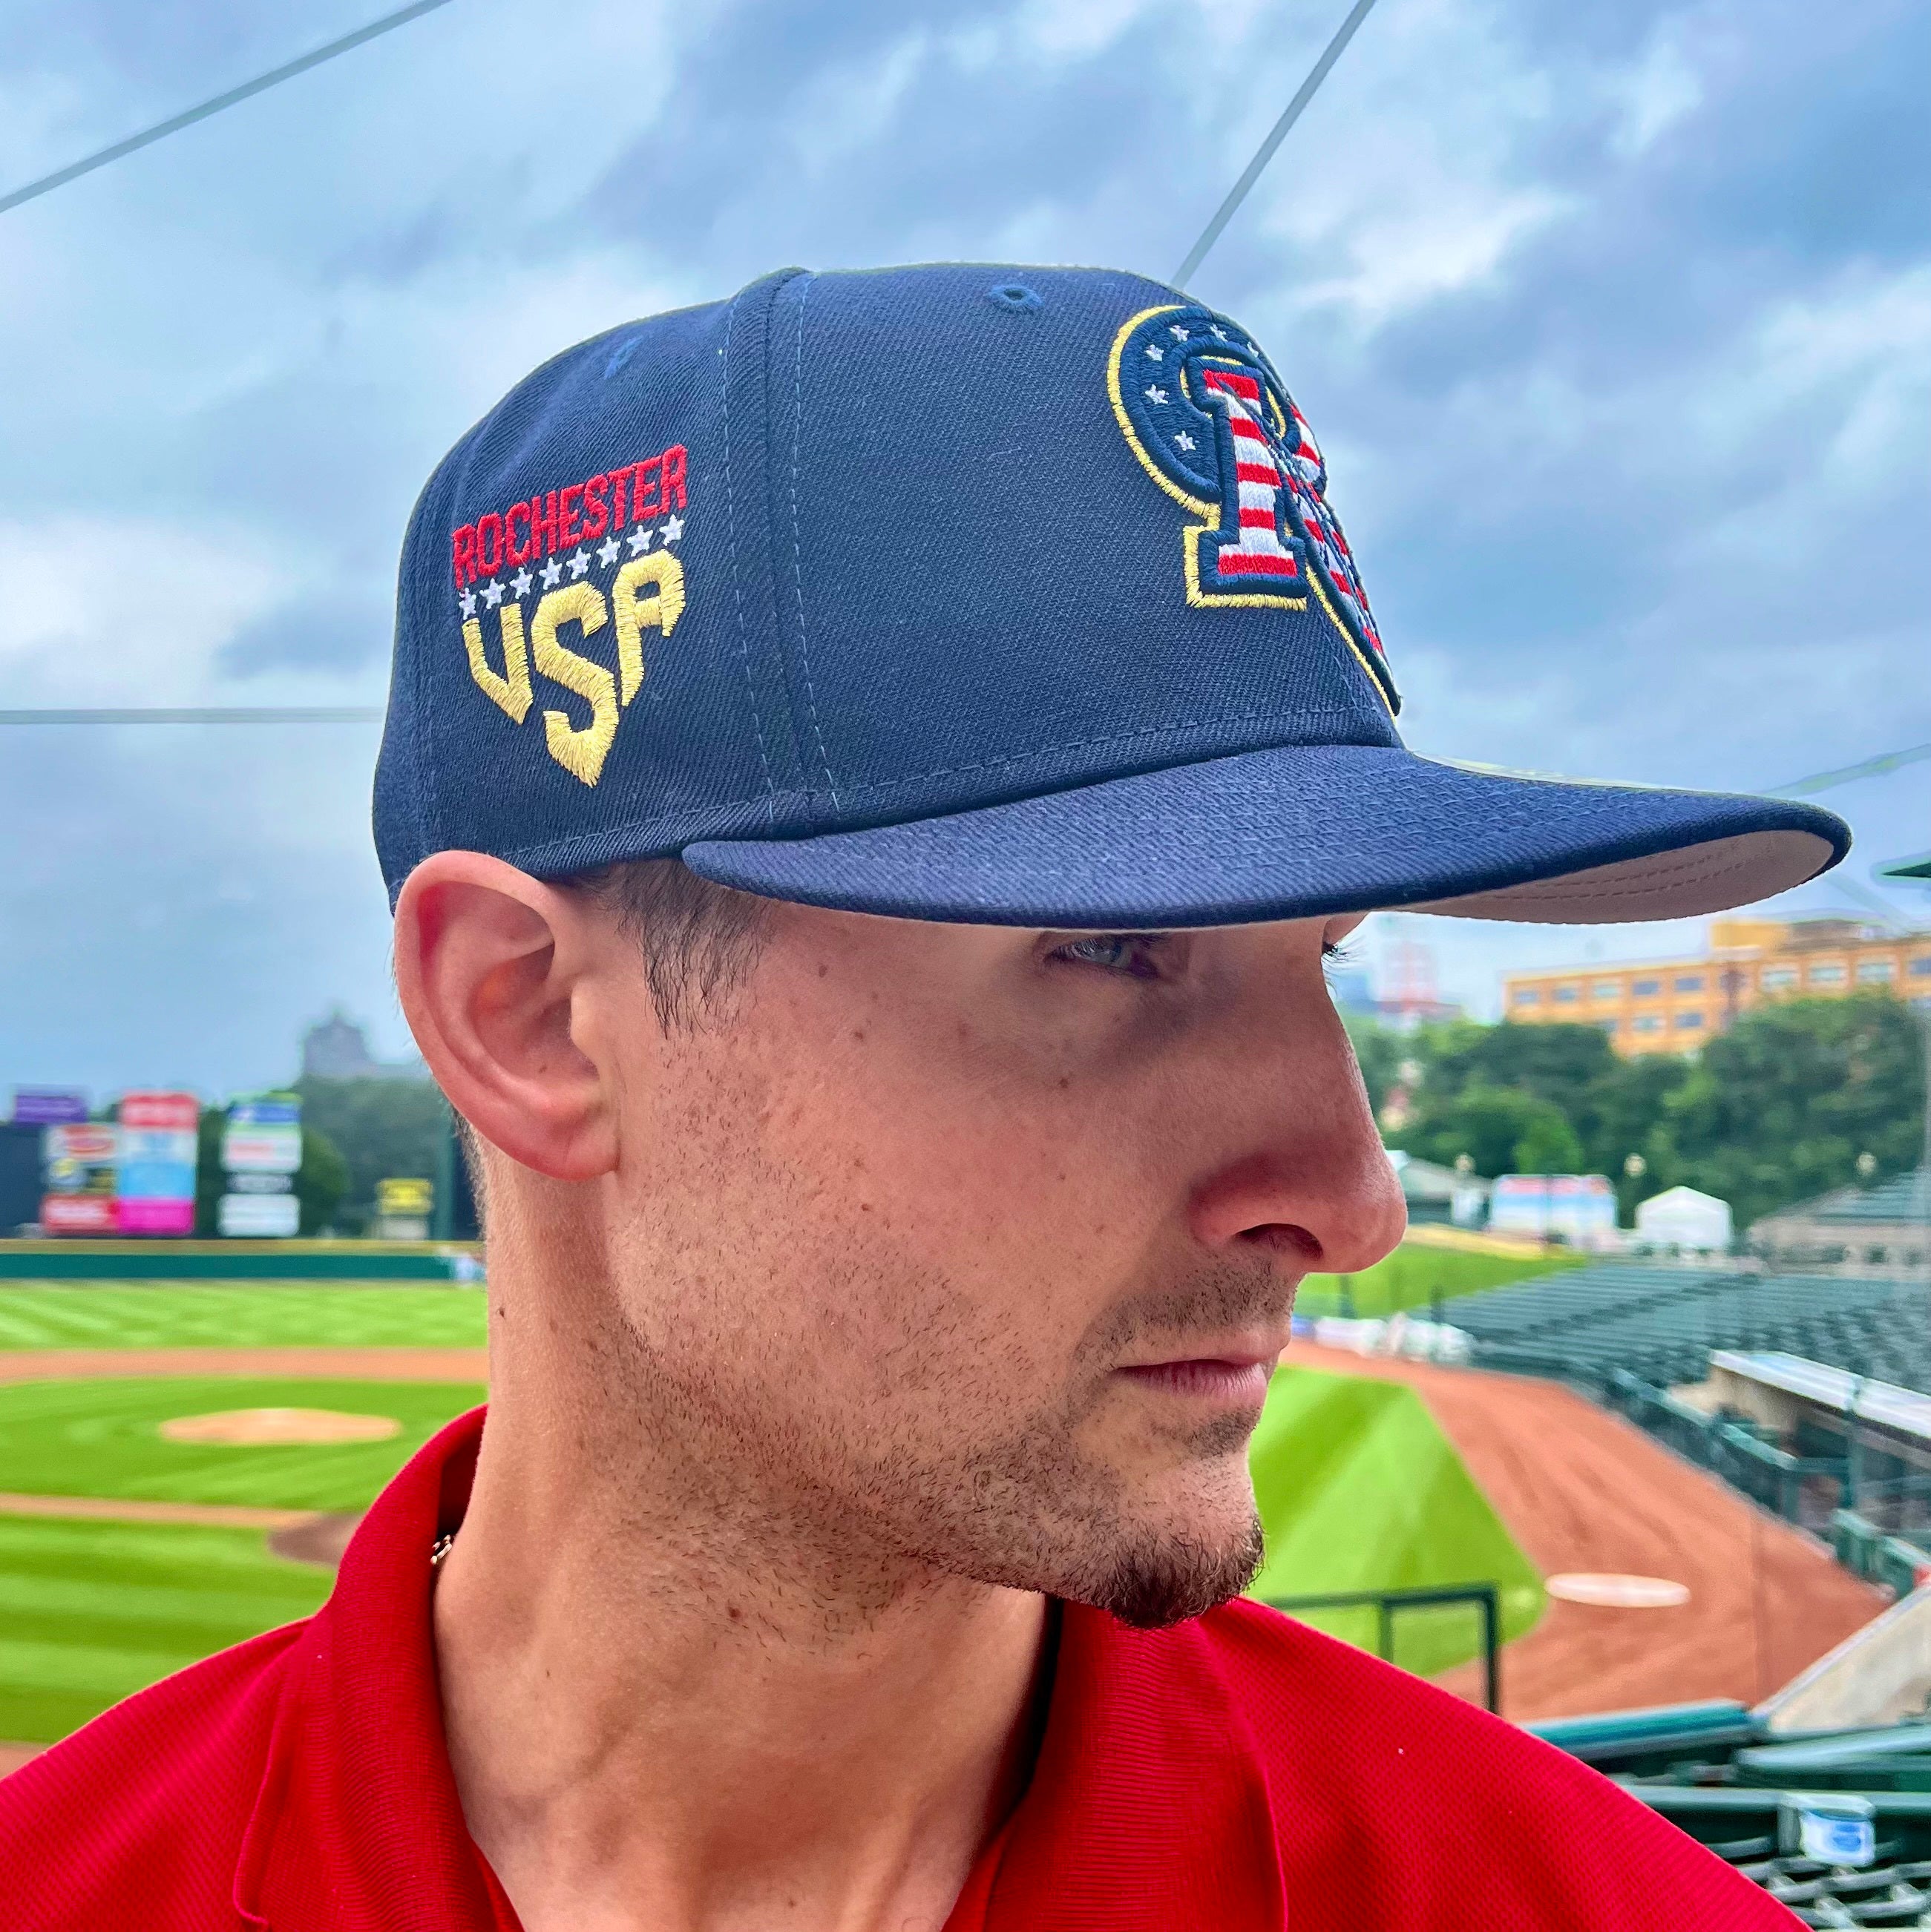 The Return of Stars & Stripes Caps to Major League Ballparks This